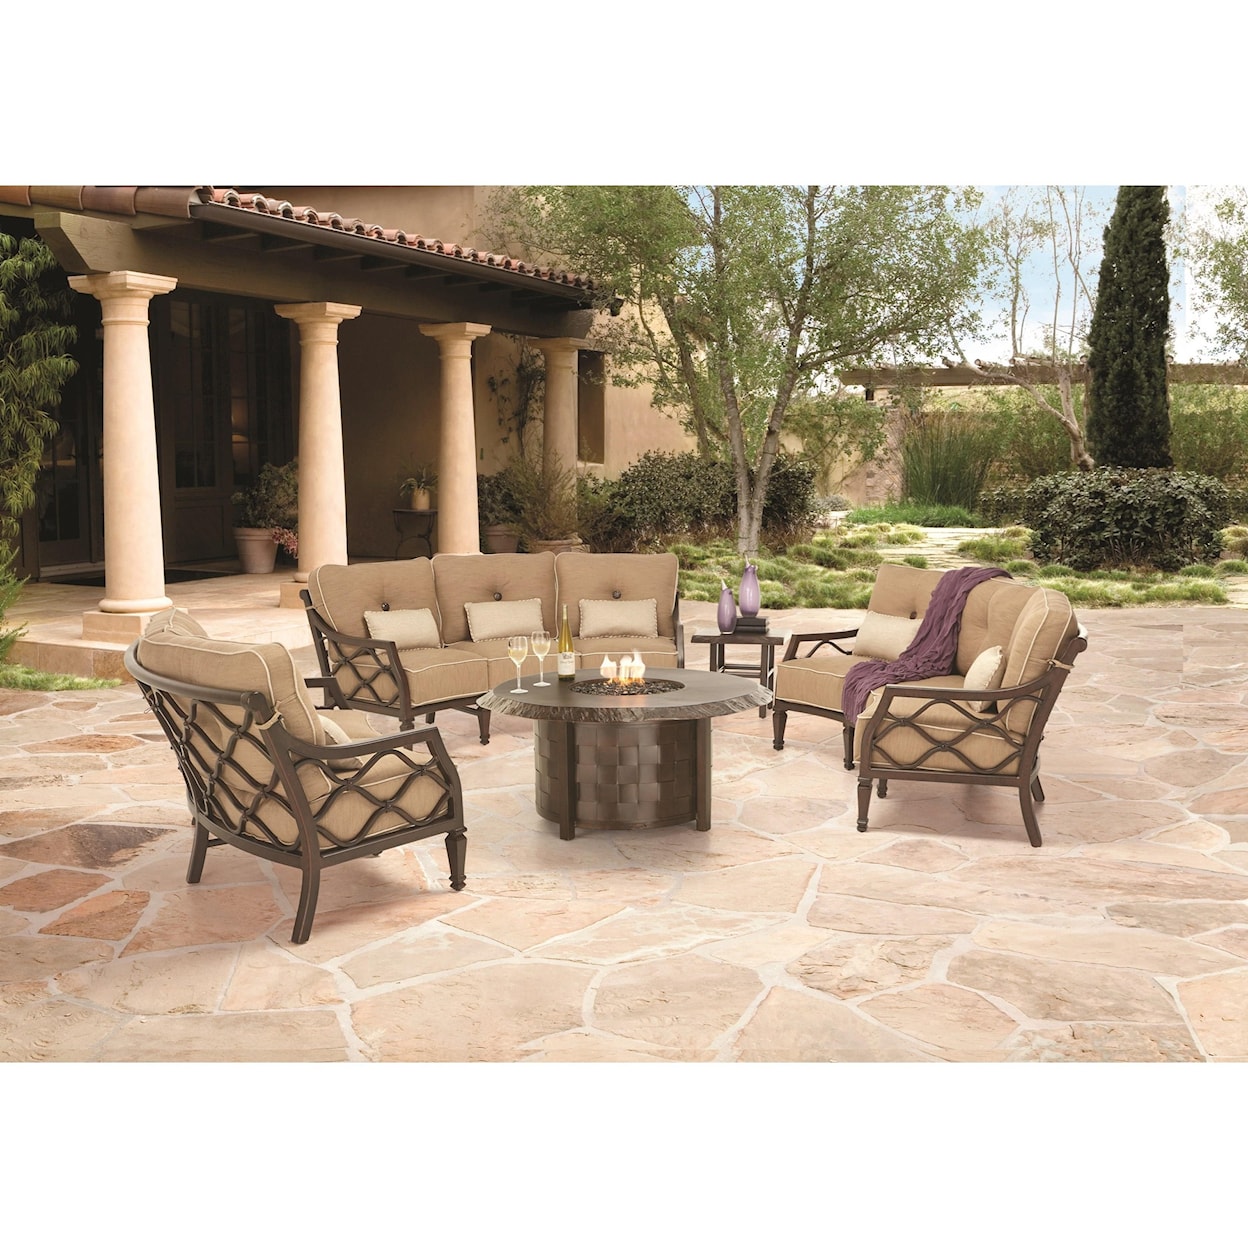 Castelle by Pride Family Brands Classical Firepits 49" Round Coffee Table with Firepit and Lid